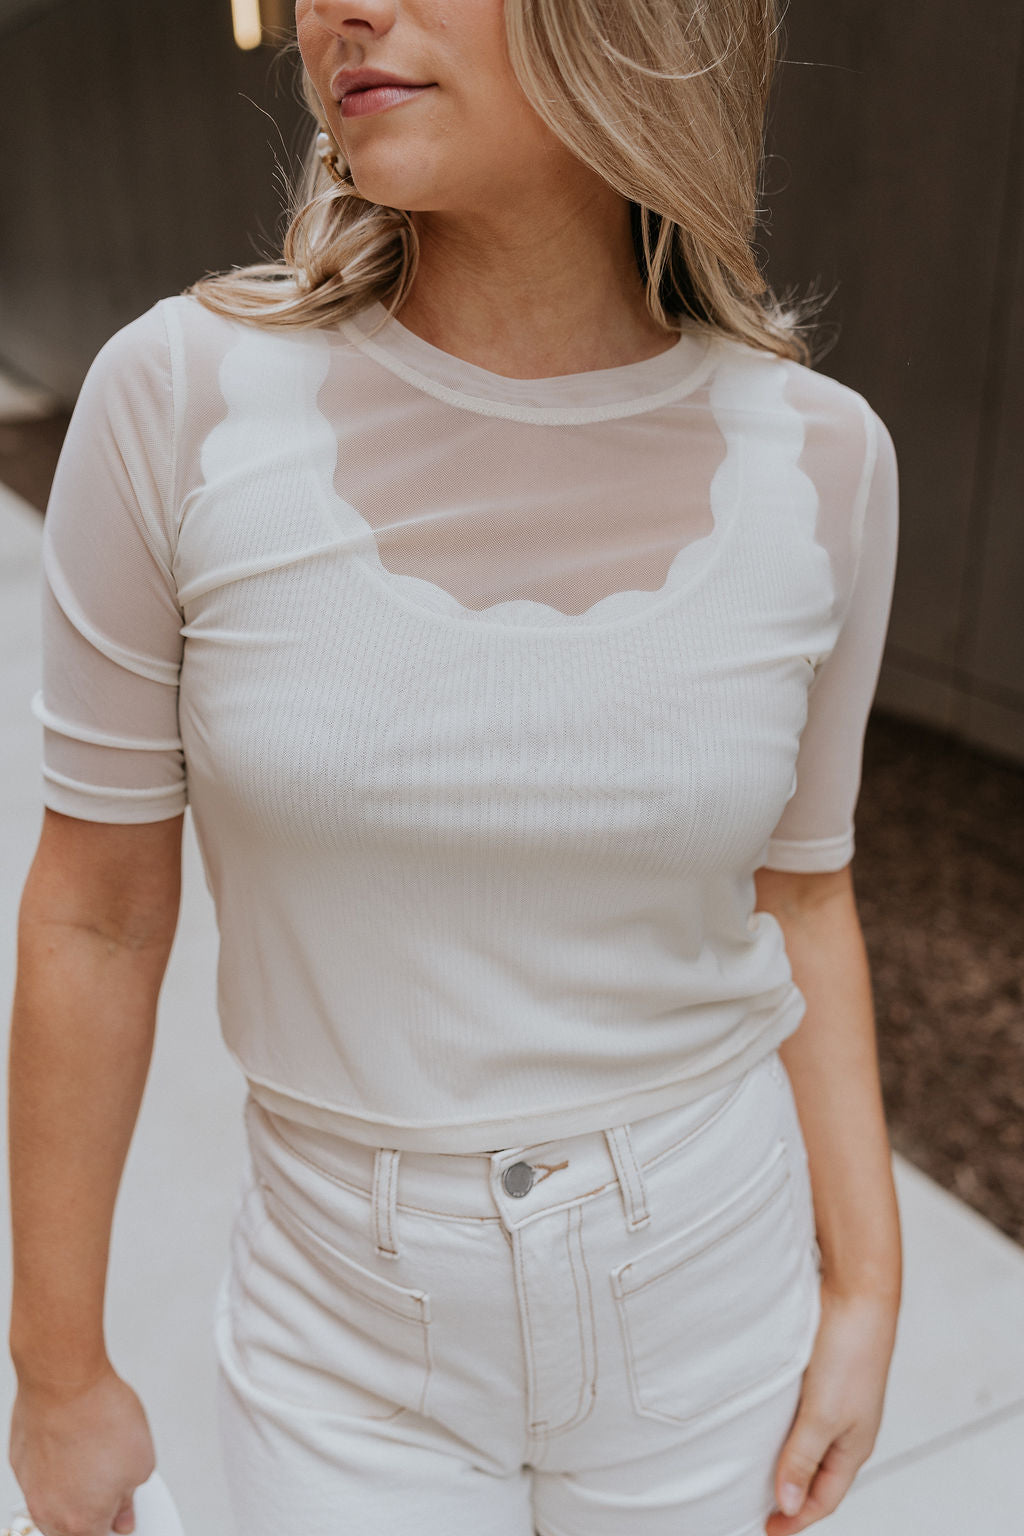 Close up  view of female model wearing the Lola Cream Sheer Short Sleeve Top which features Cream Sheer Fabric, Round Neckline, Cropped Waist and Short Sleeves